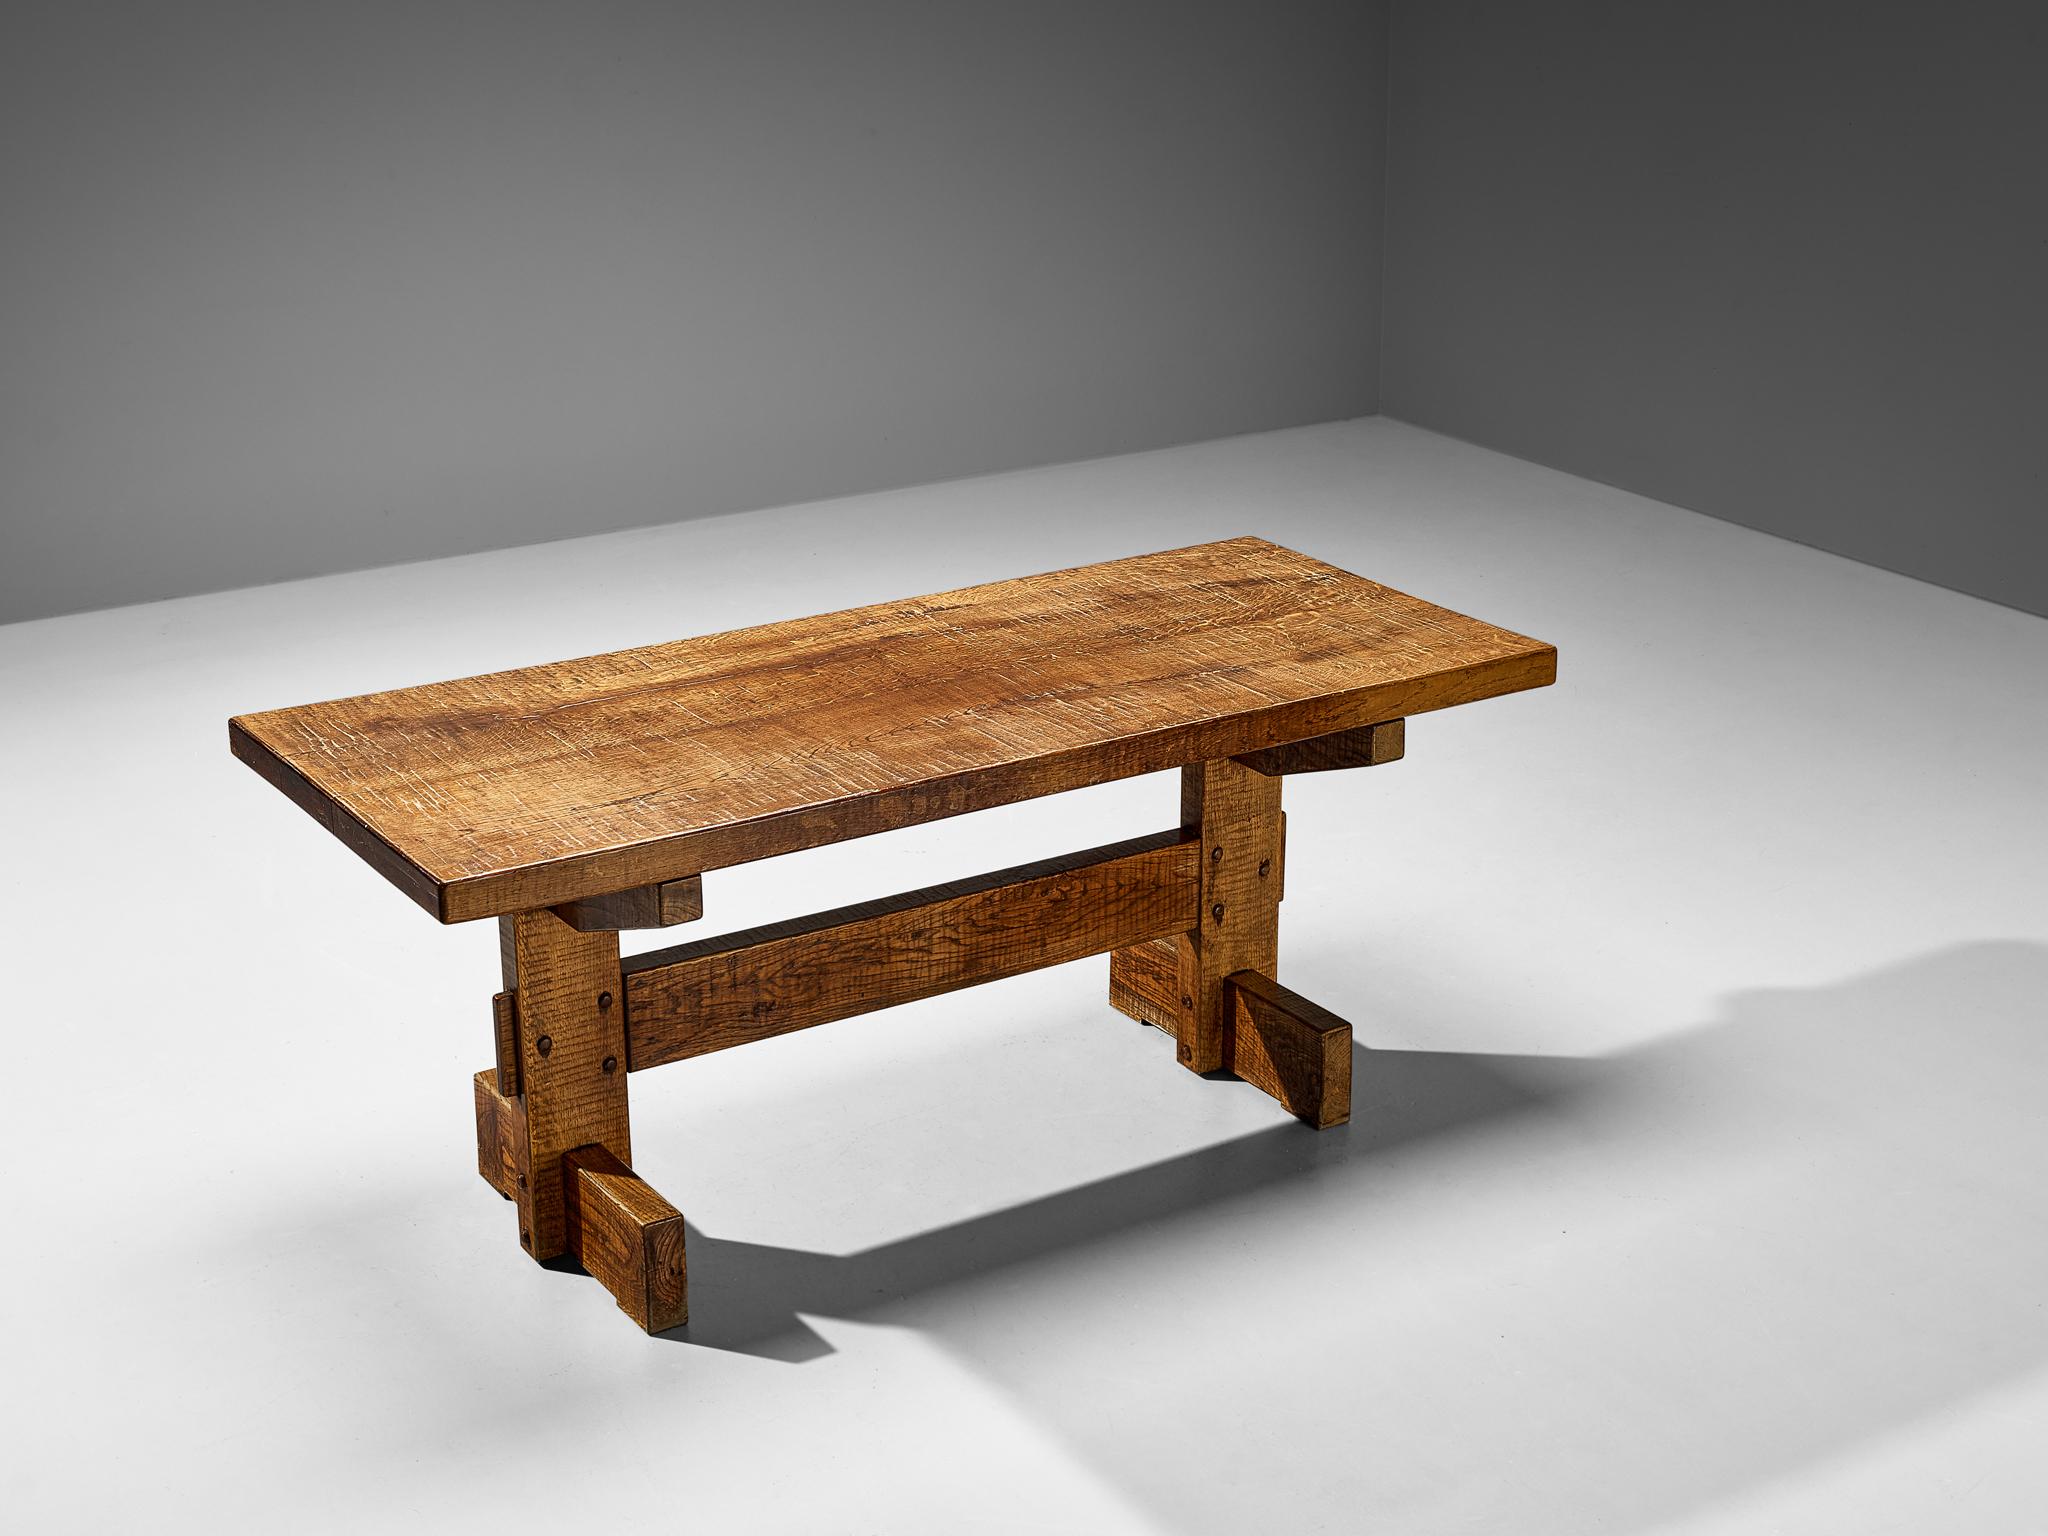 Giuseppe Rivadossi for Officina Rivadossi, dining table, oak, Italy, 1970s.

Giuseppe Rivadossi once again proves his great eye for materialization and technicality this table is exemplary for. The table is architecturally built based on the